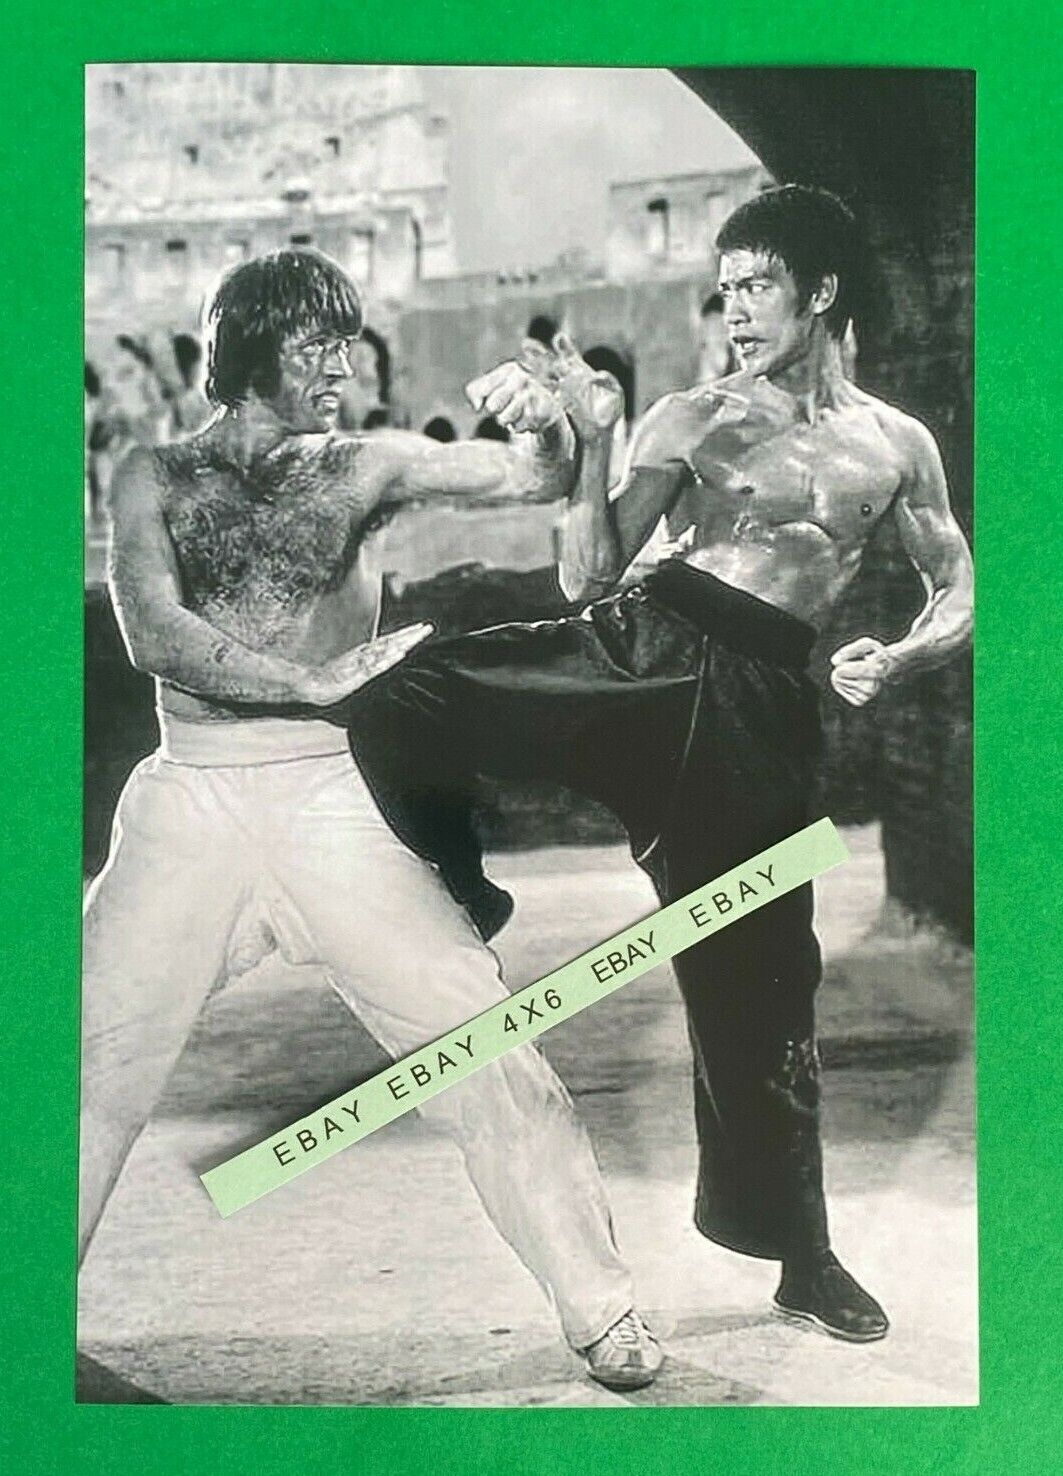 Found 4X6 Photo of Bruce Lee and Chuck Norris Kung Foo Fighting 